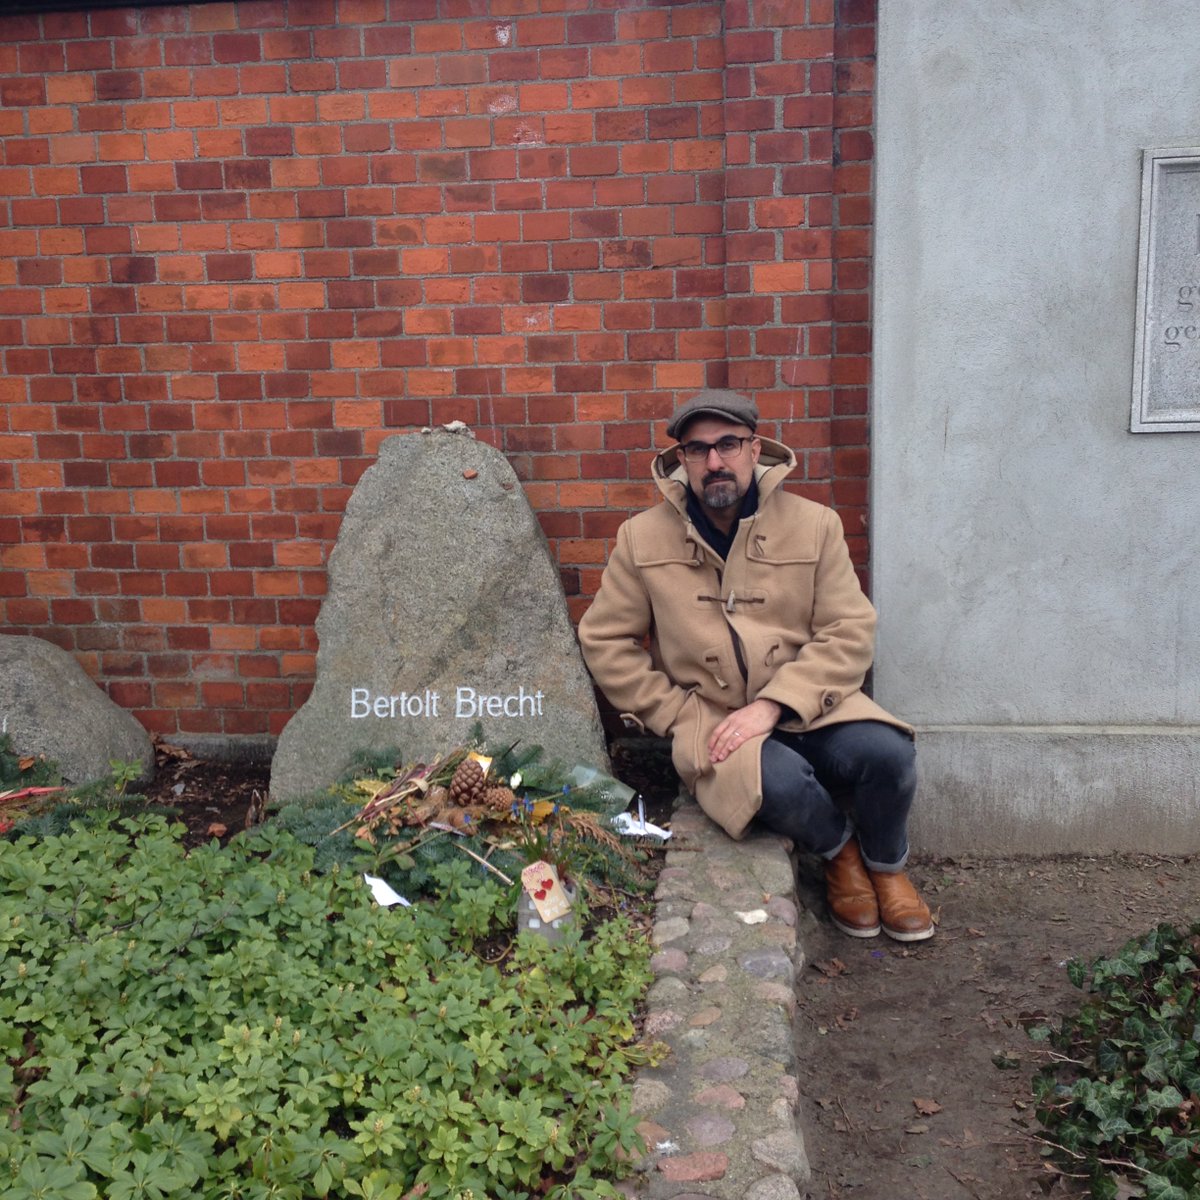 I do go and visit the graves of writers. Here I am with Brecht